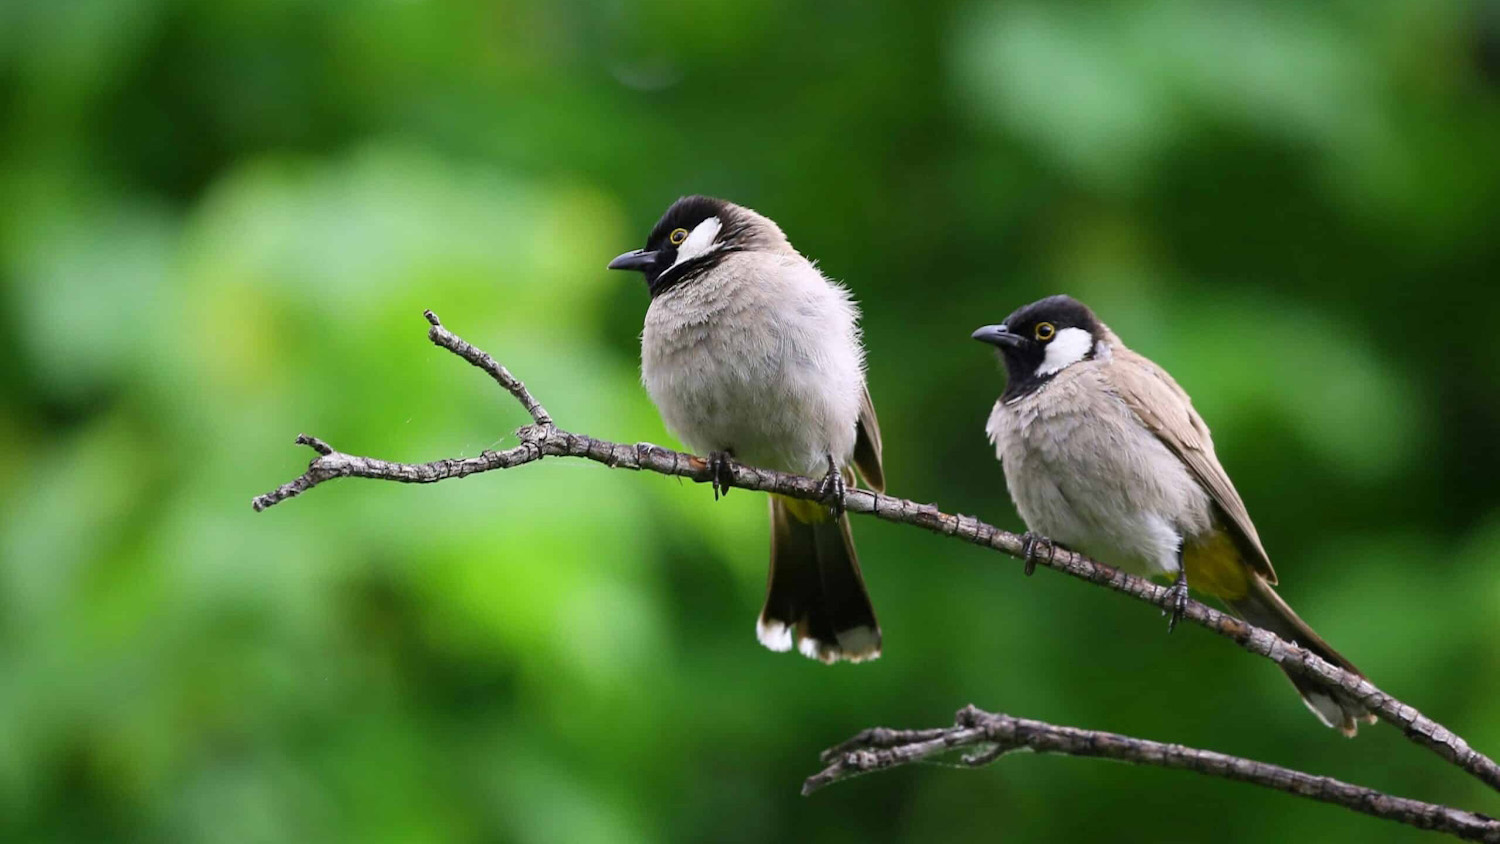 Two birds perched on a tree branch.